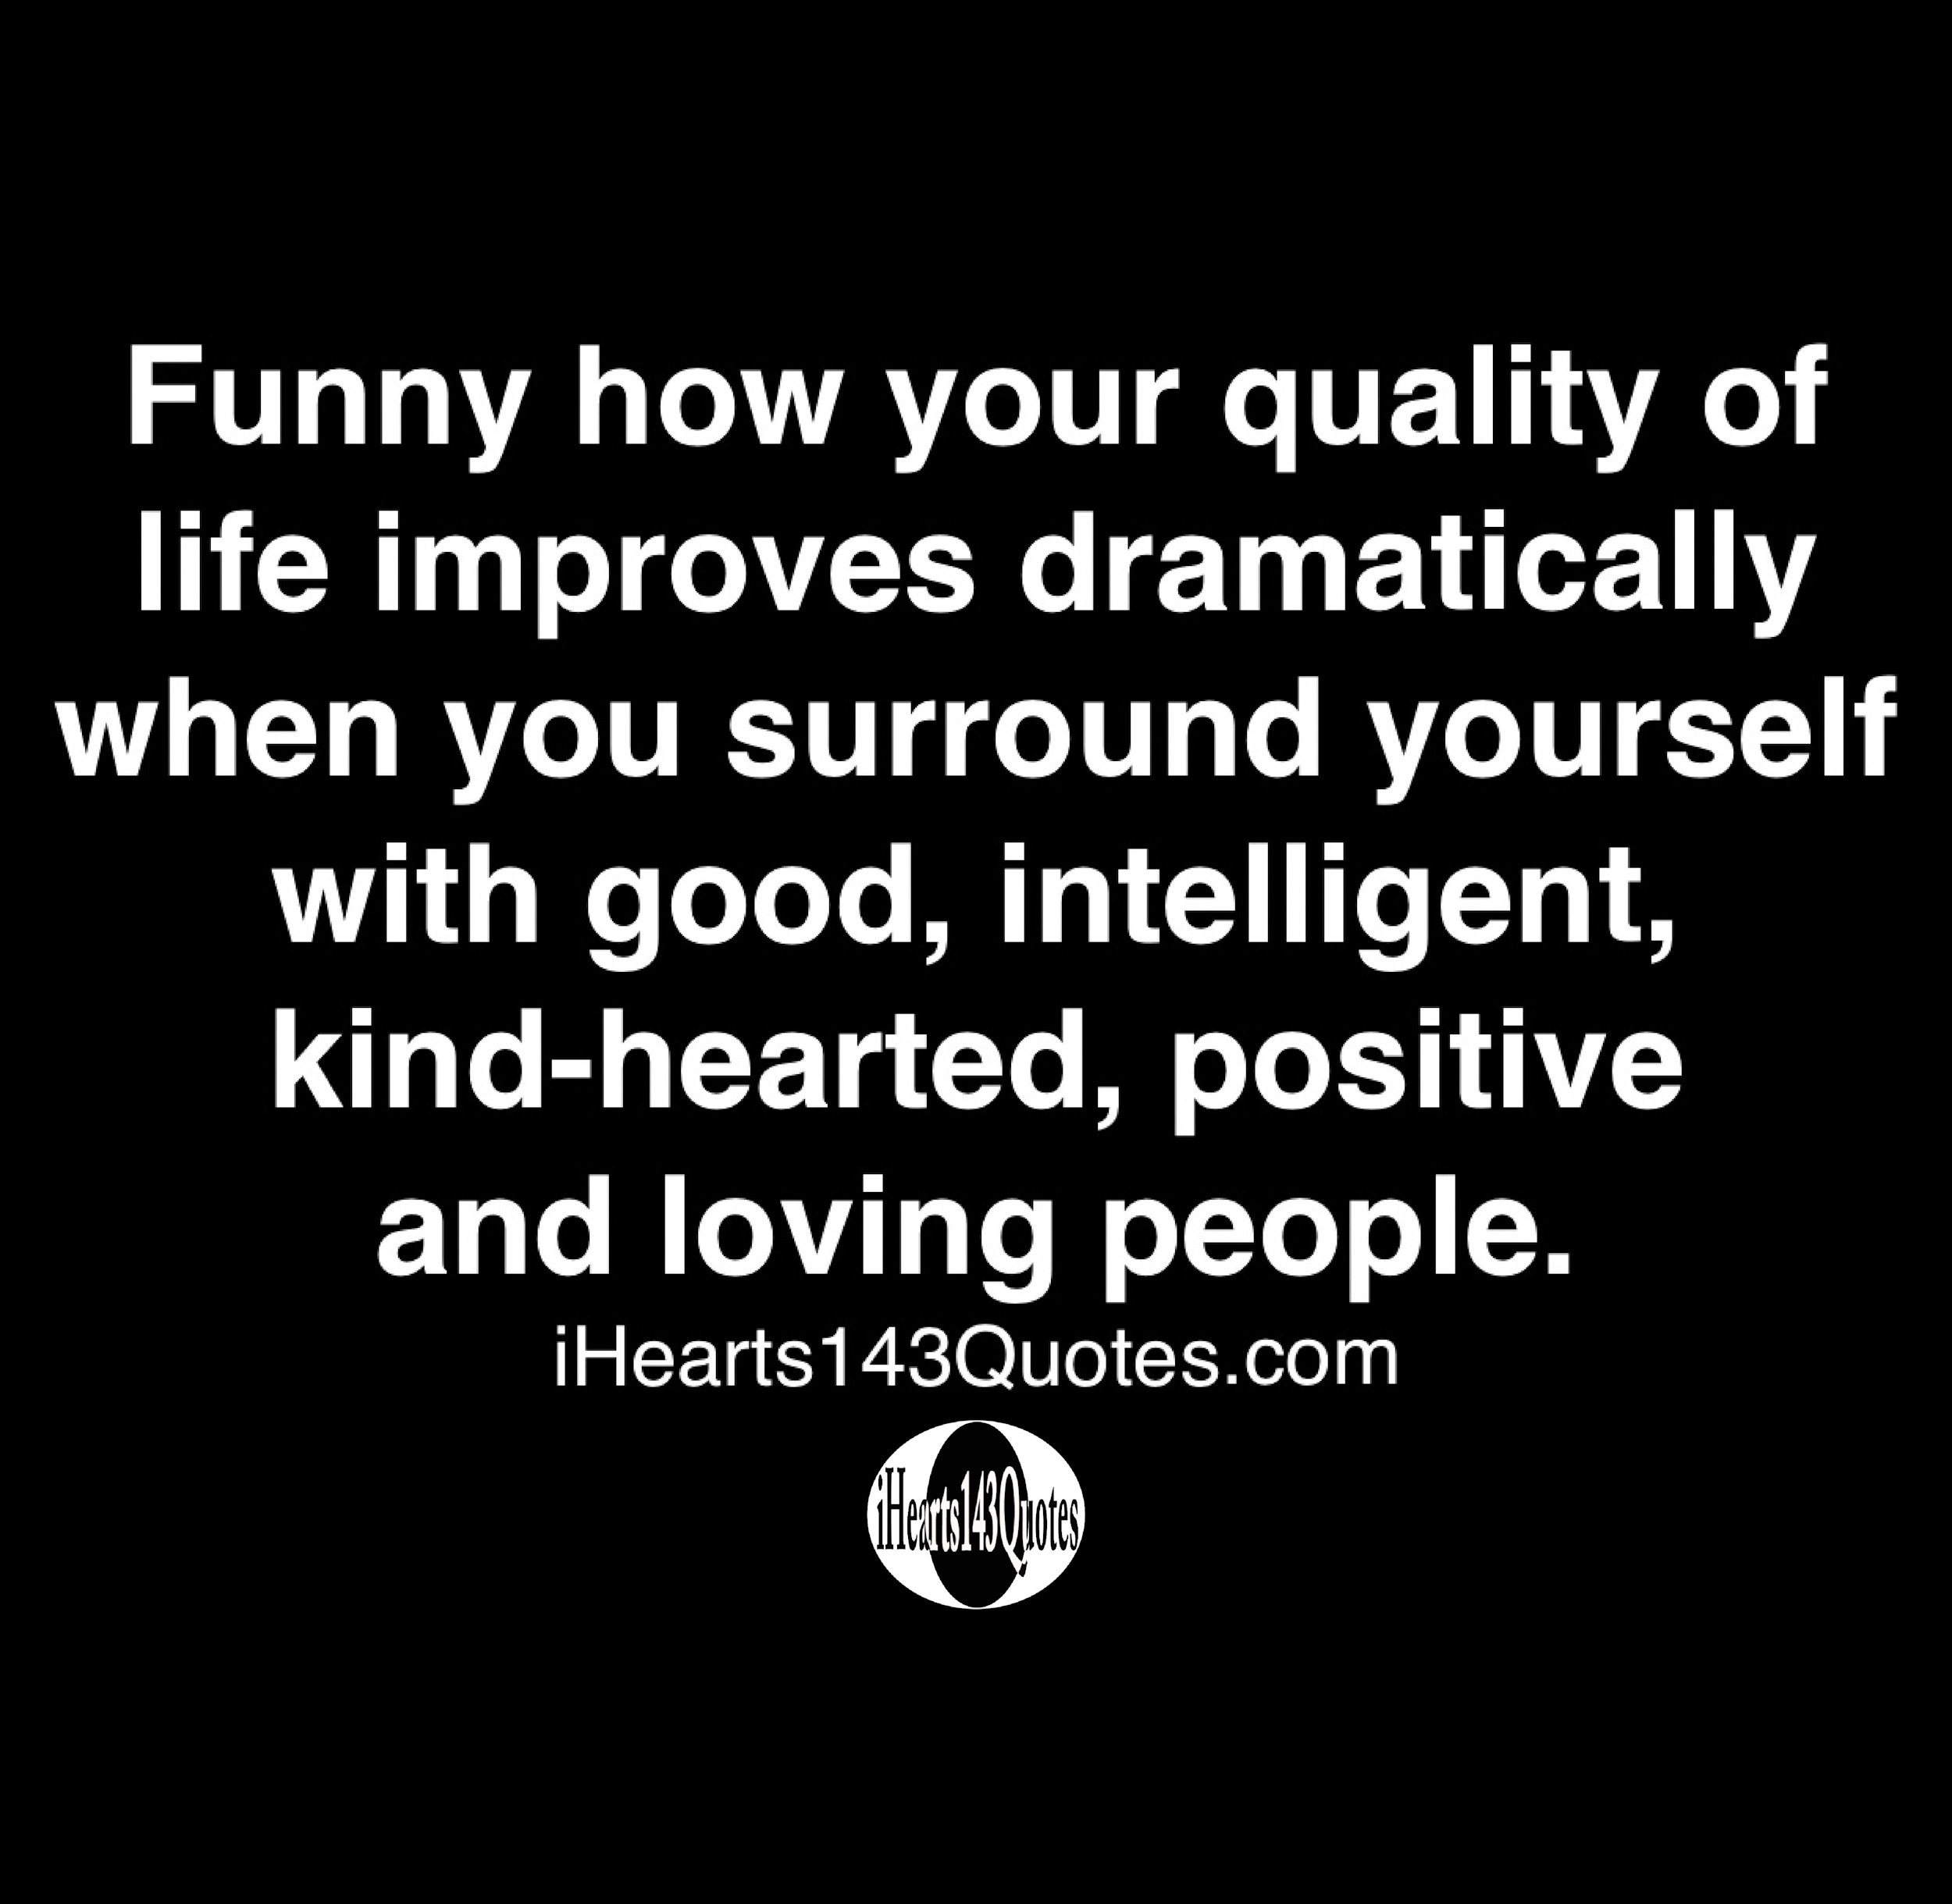 Funny How Your Quality Of Life Improves Dramatically When You Surround Yourself With Good, Intelligent, Kind-Hearted, Positive And Loving People - Quotes - Ihearts143Quotes